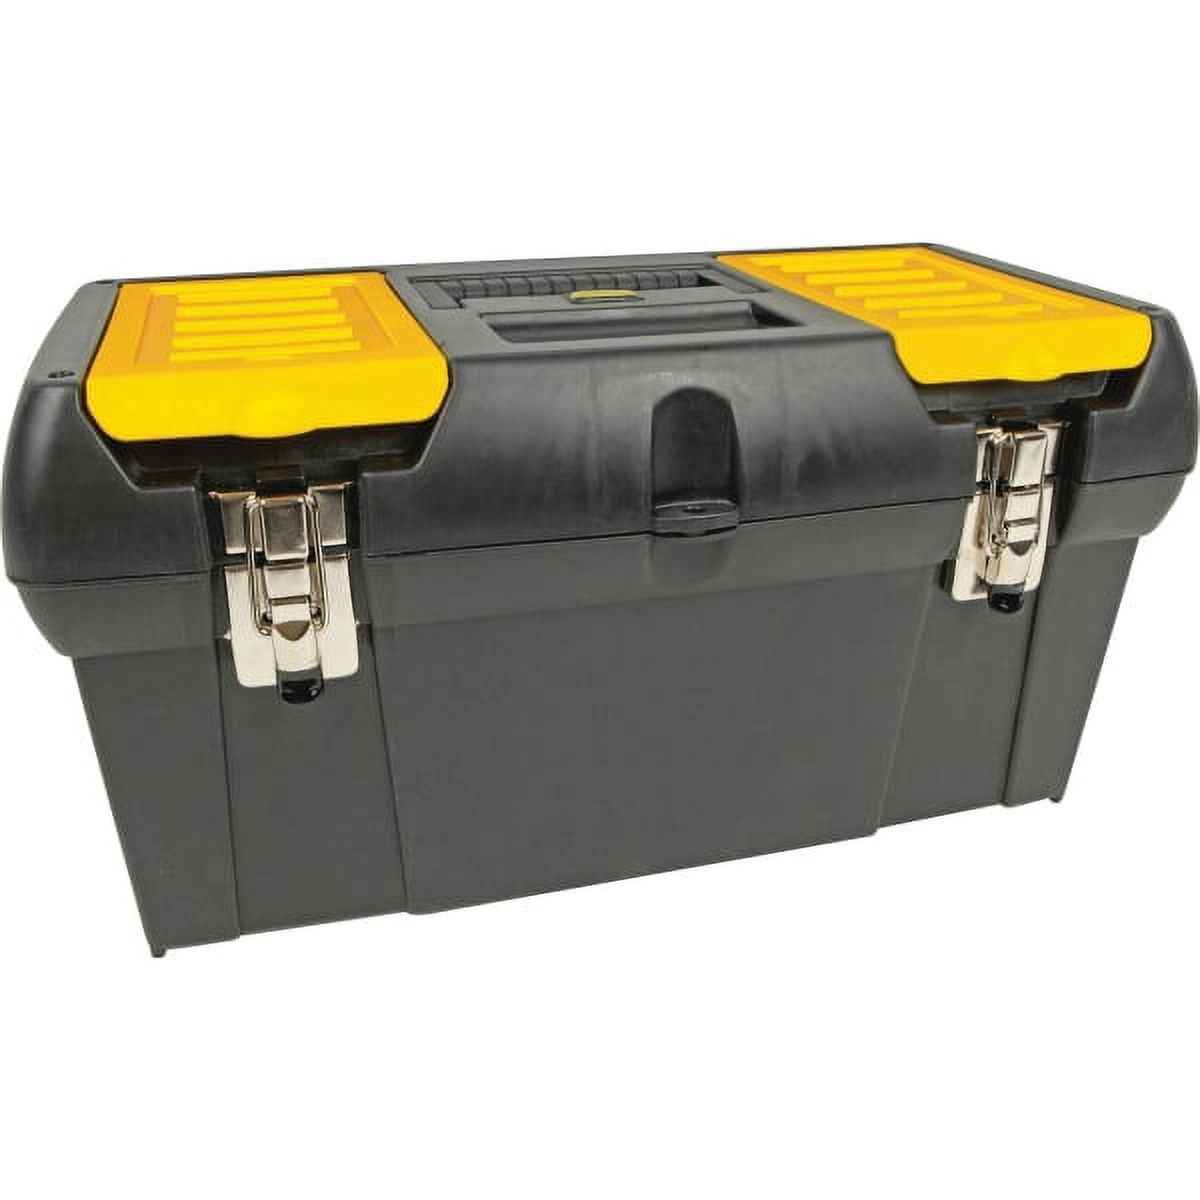 Stanley STST19005 19-Inch Tool Box - image 1 of 2